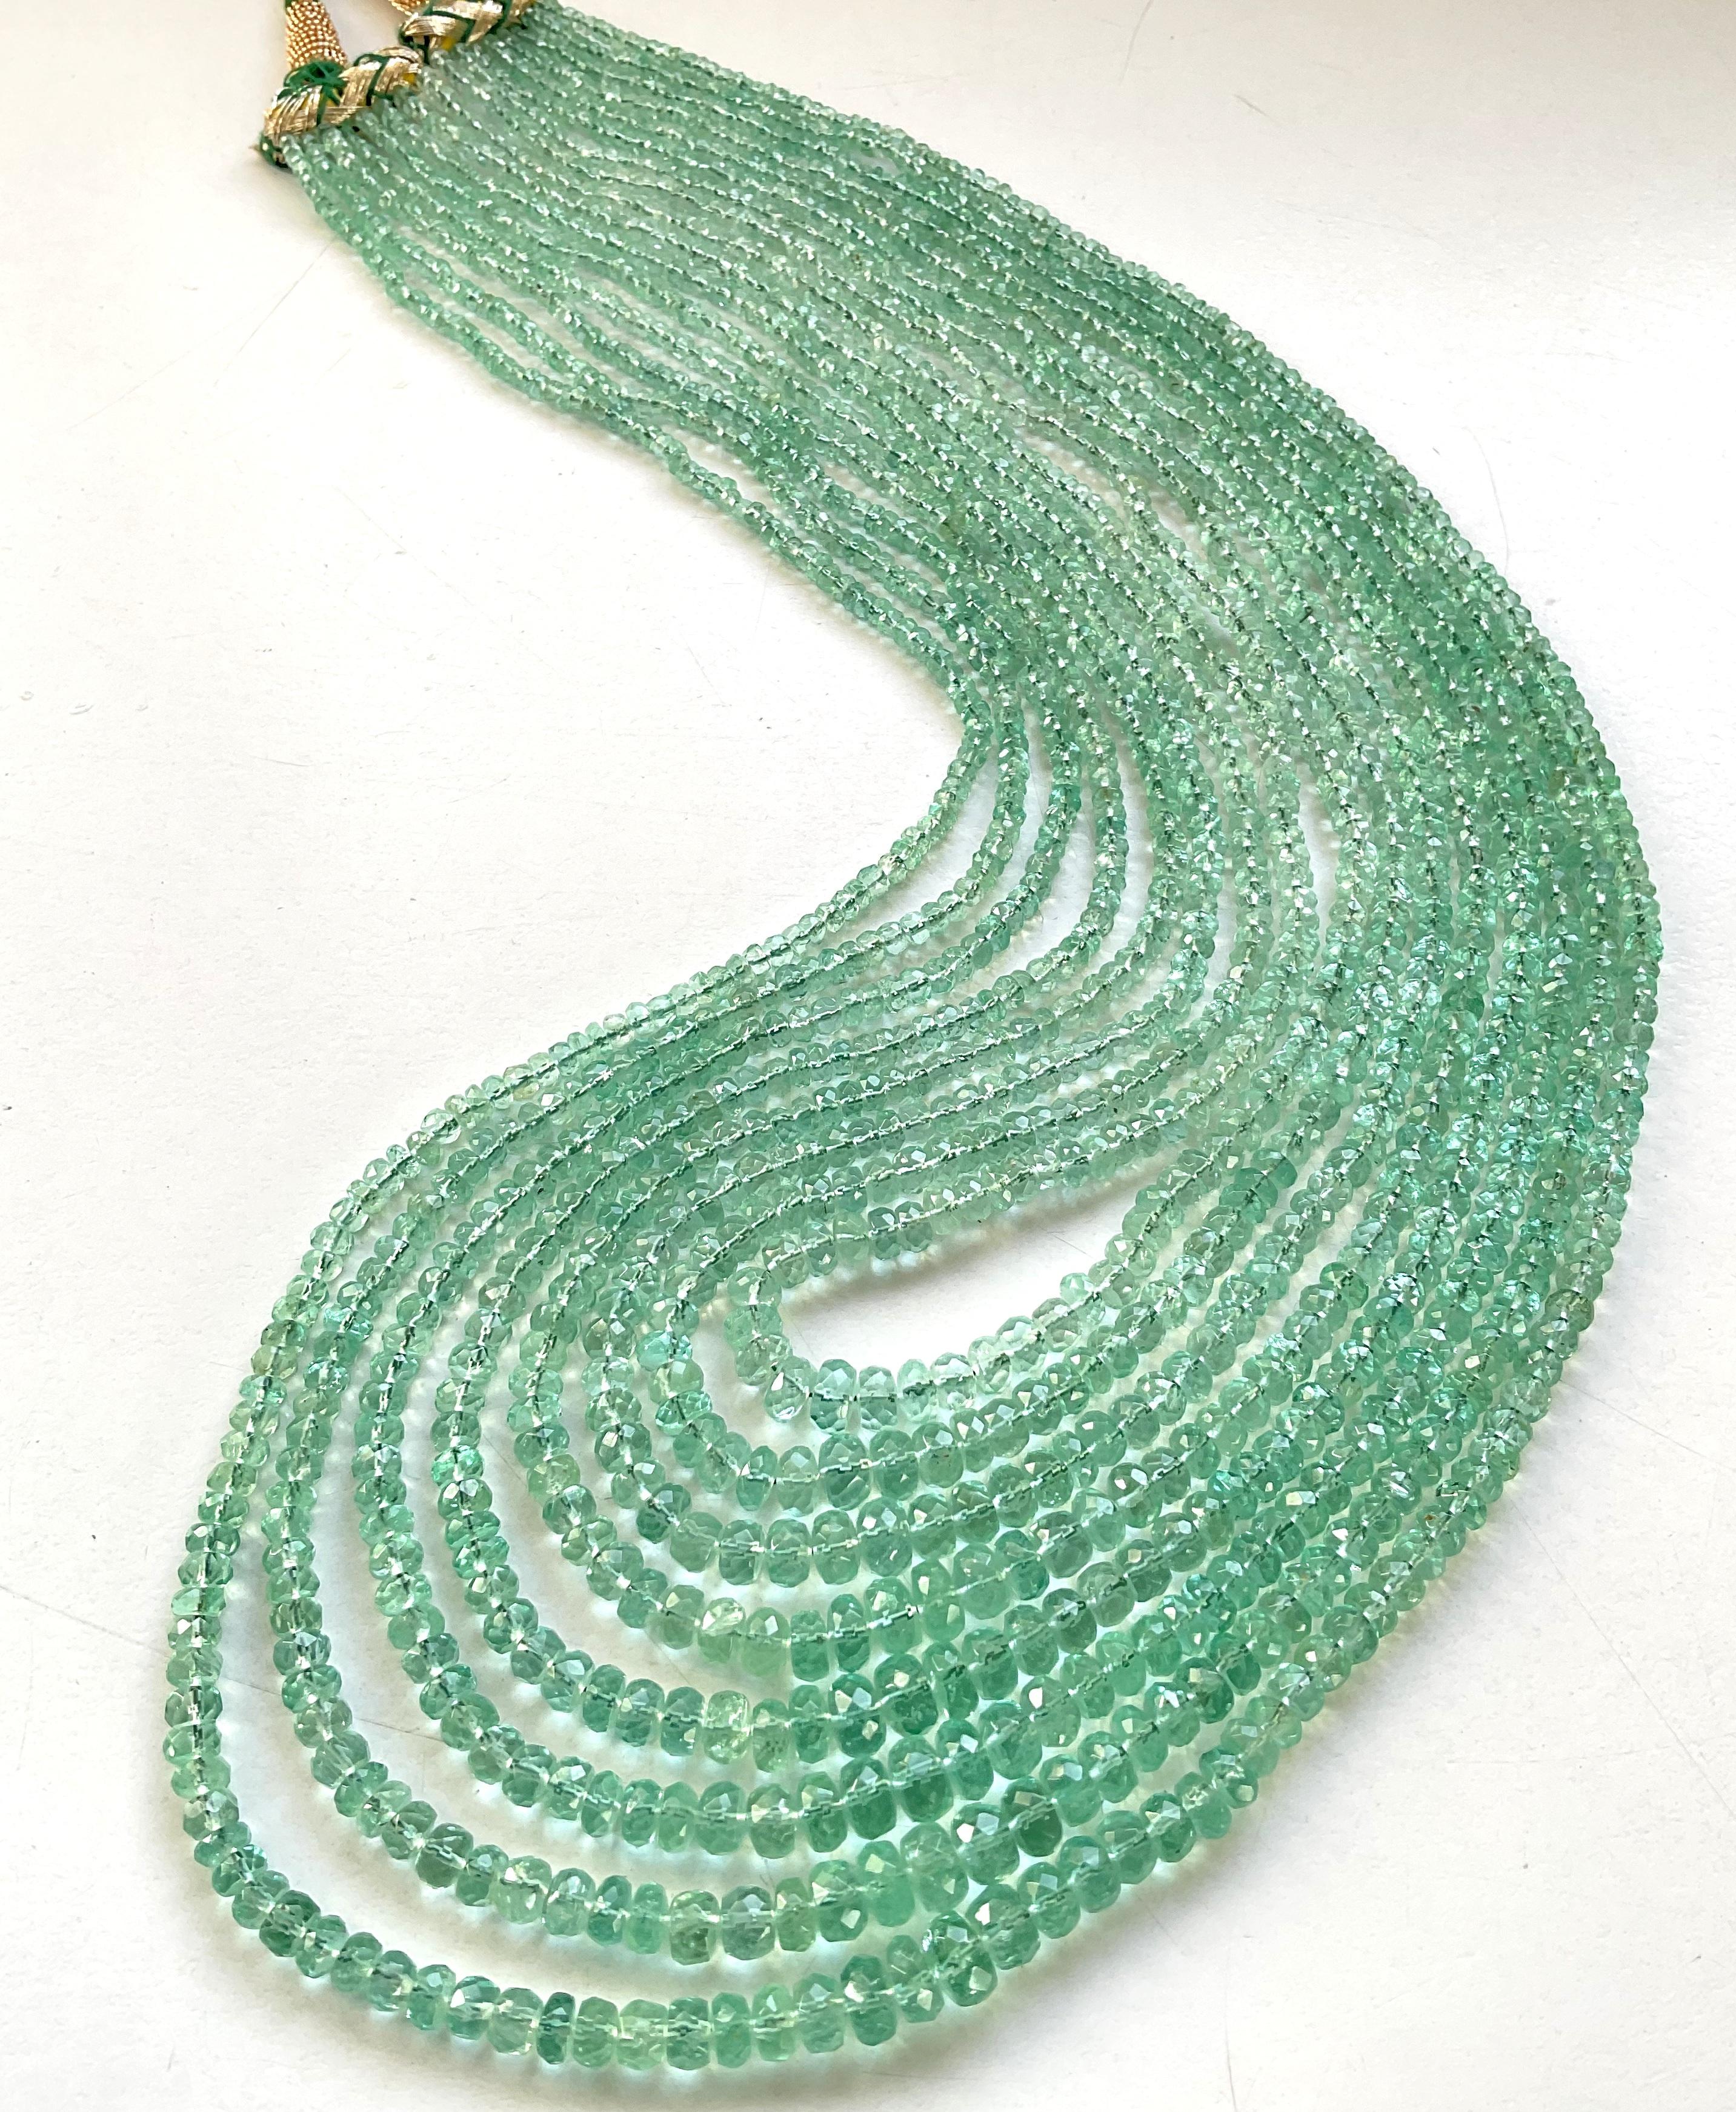 342.09 Carats Panjshir Emerald Faceted Beads For Fine Jewelry Natural Gemstone For Sale 2